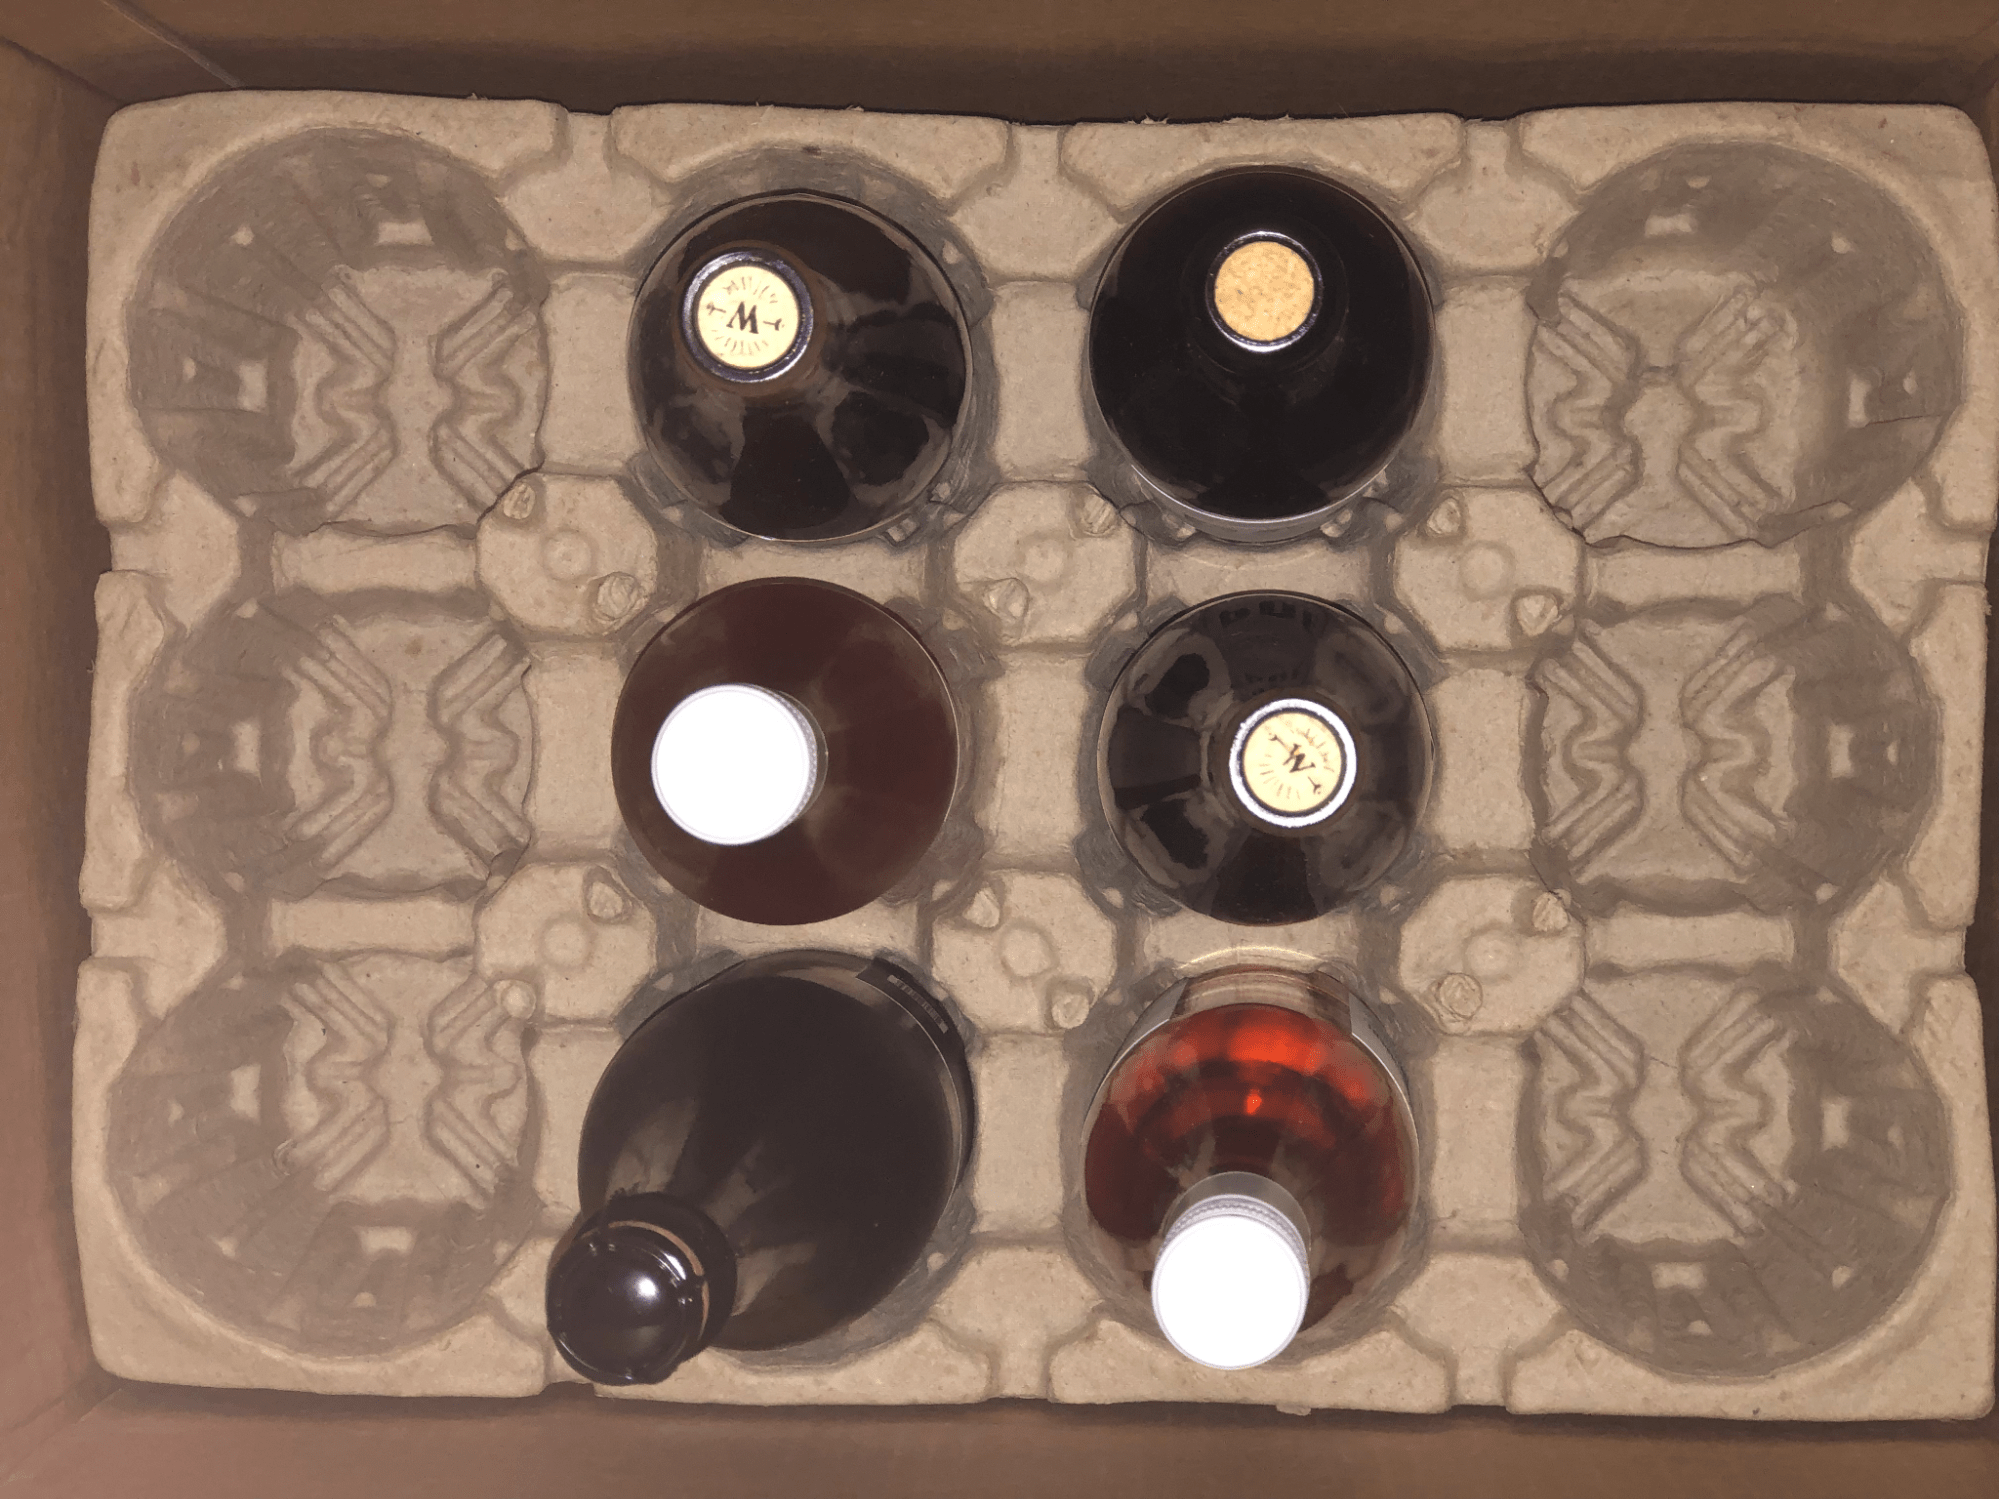 Wines in a box delivered from Winc.